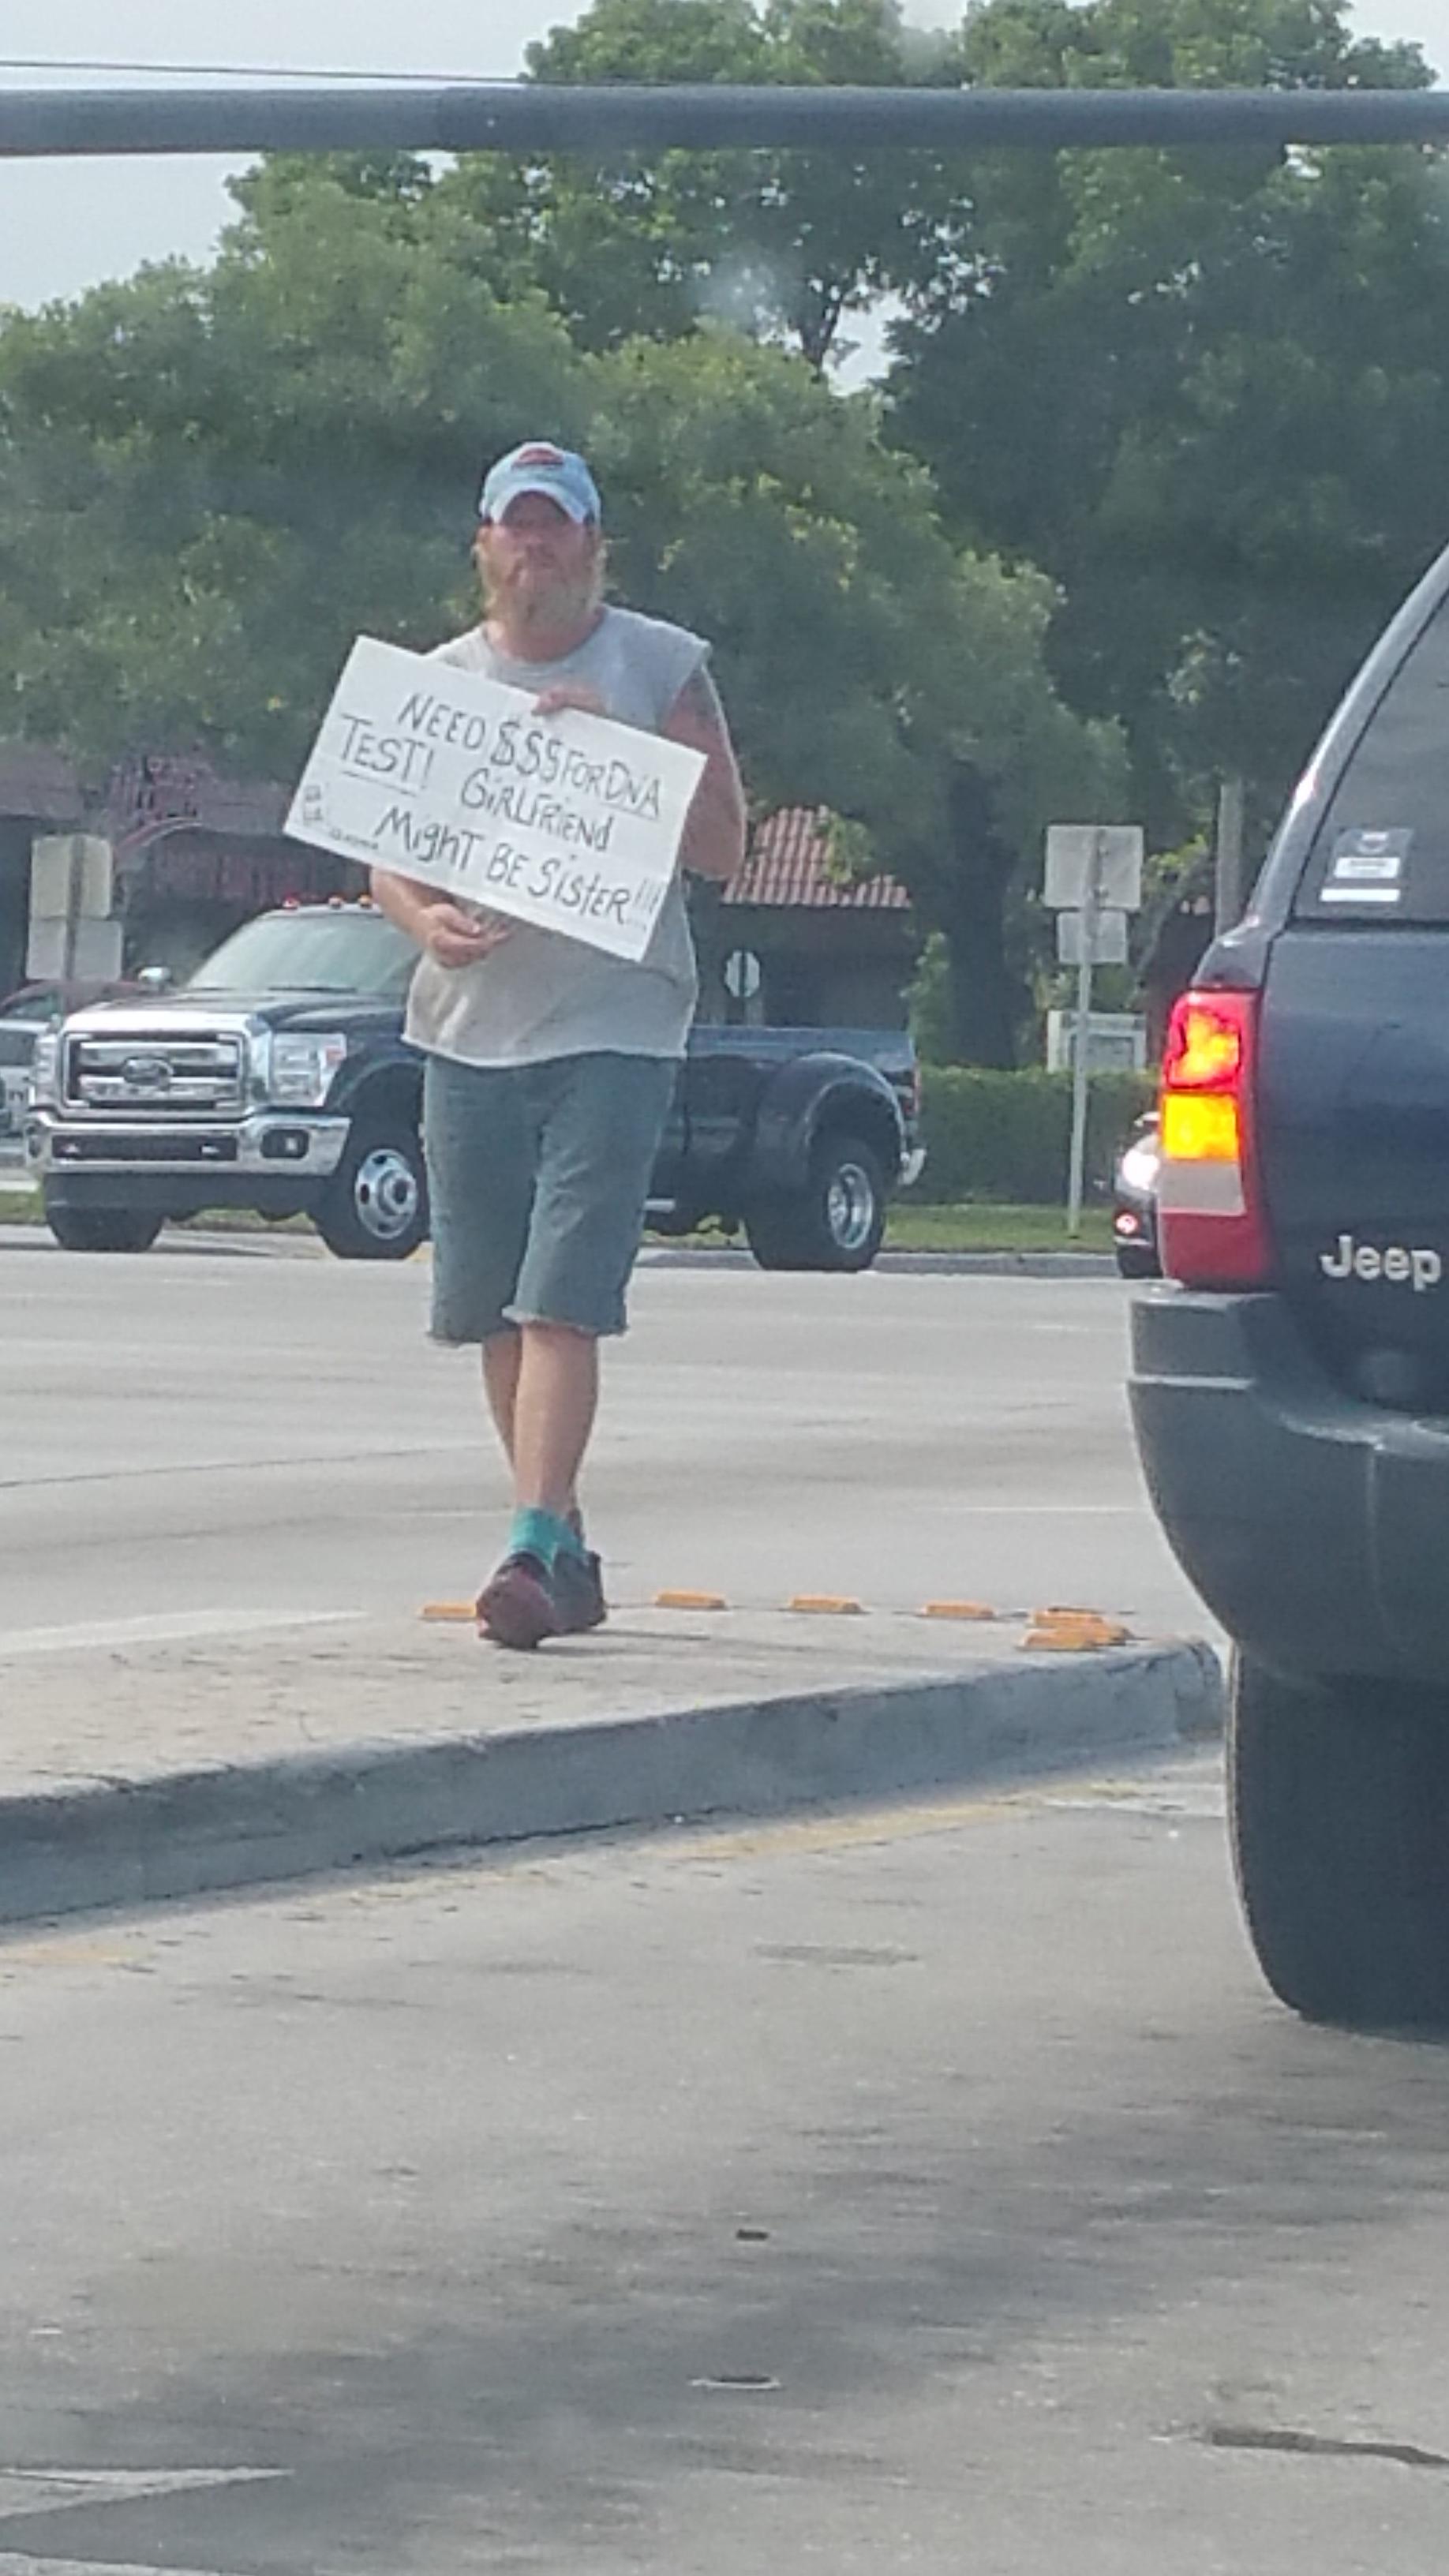 Saw a guy asking for money on the street.